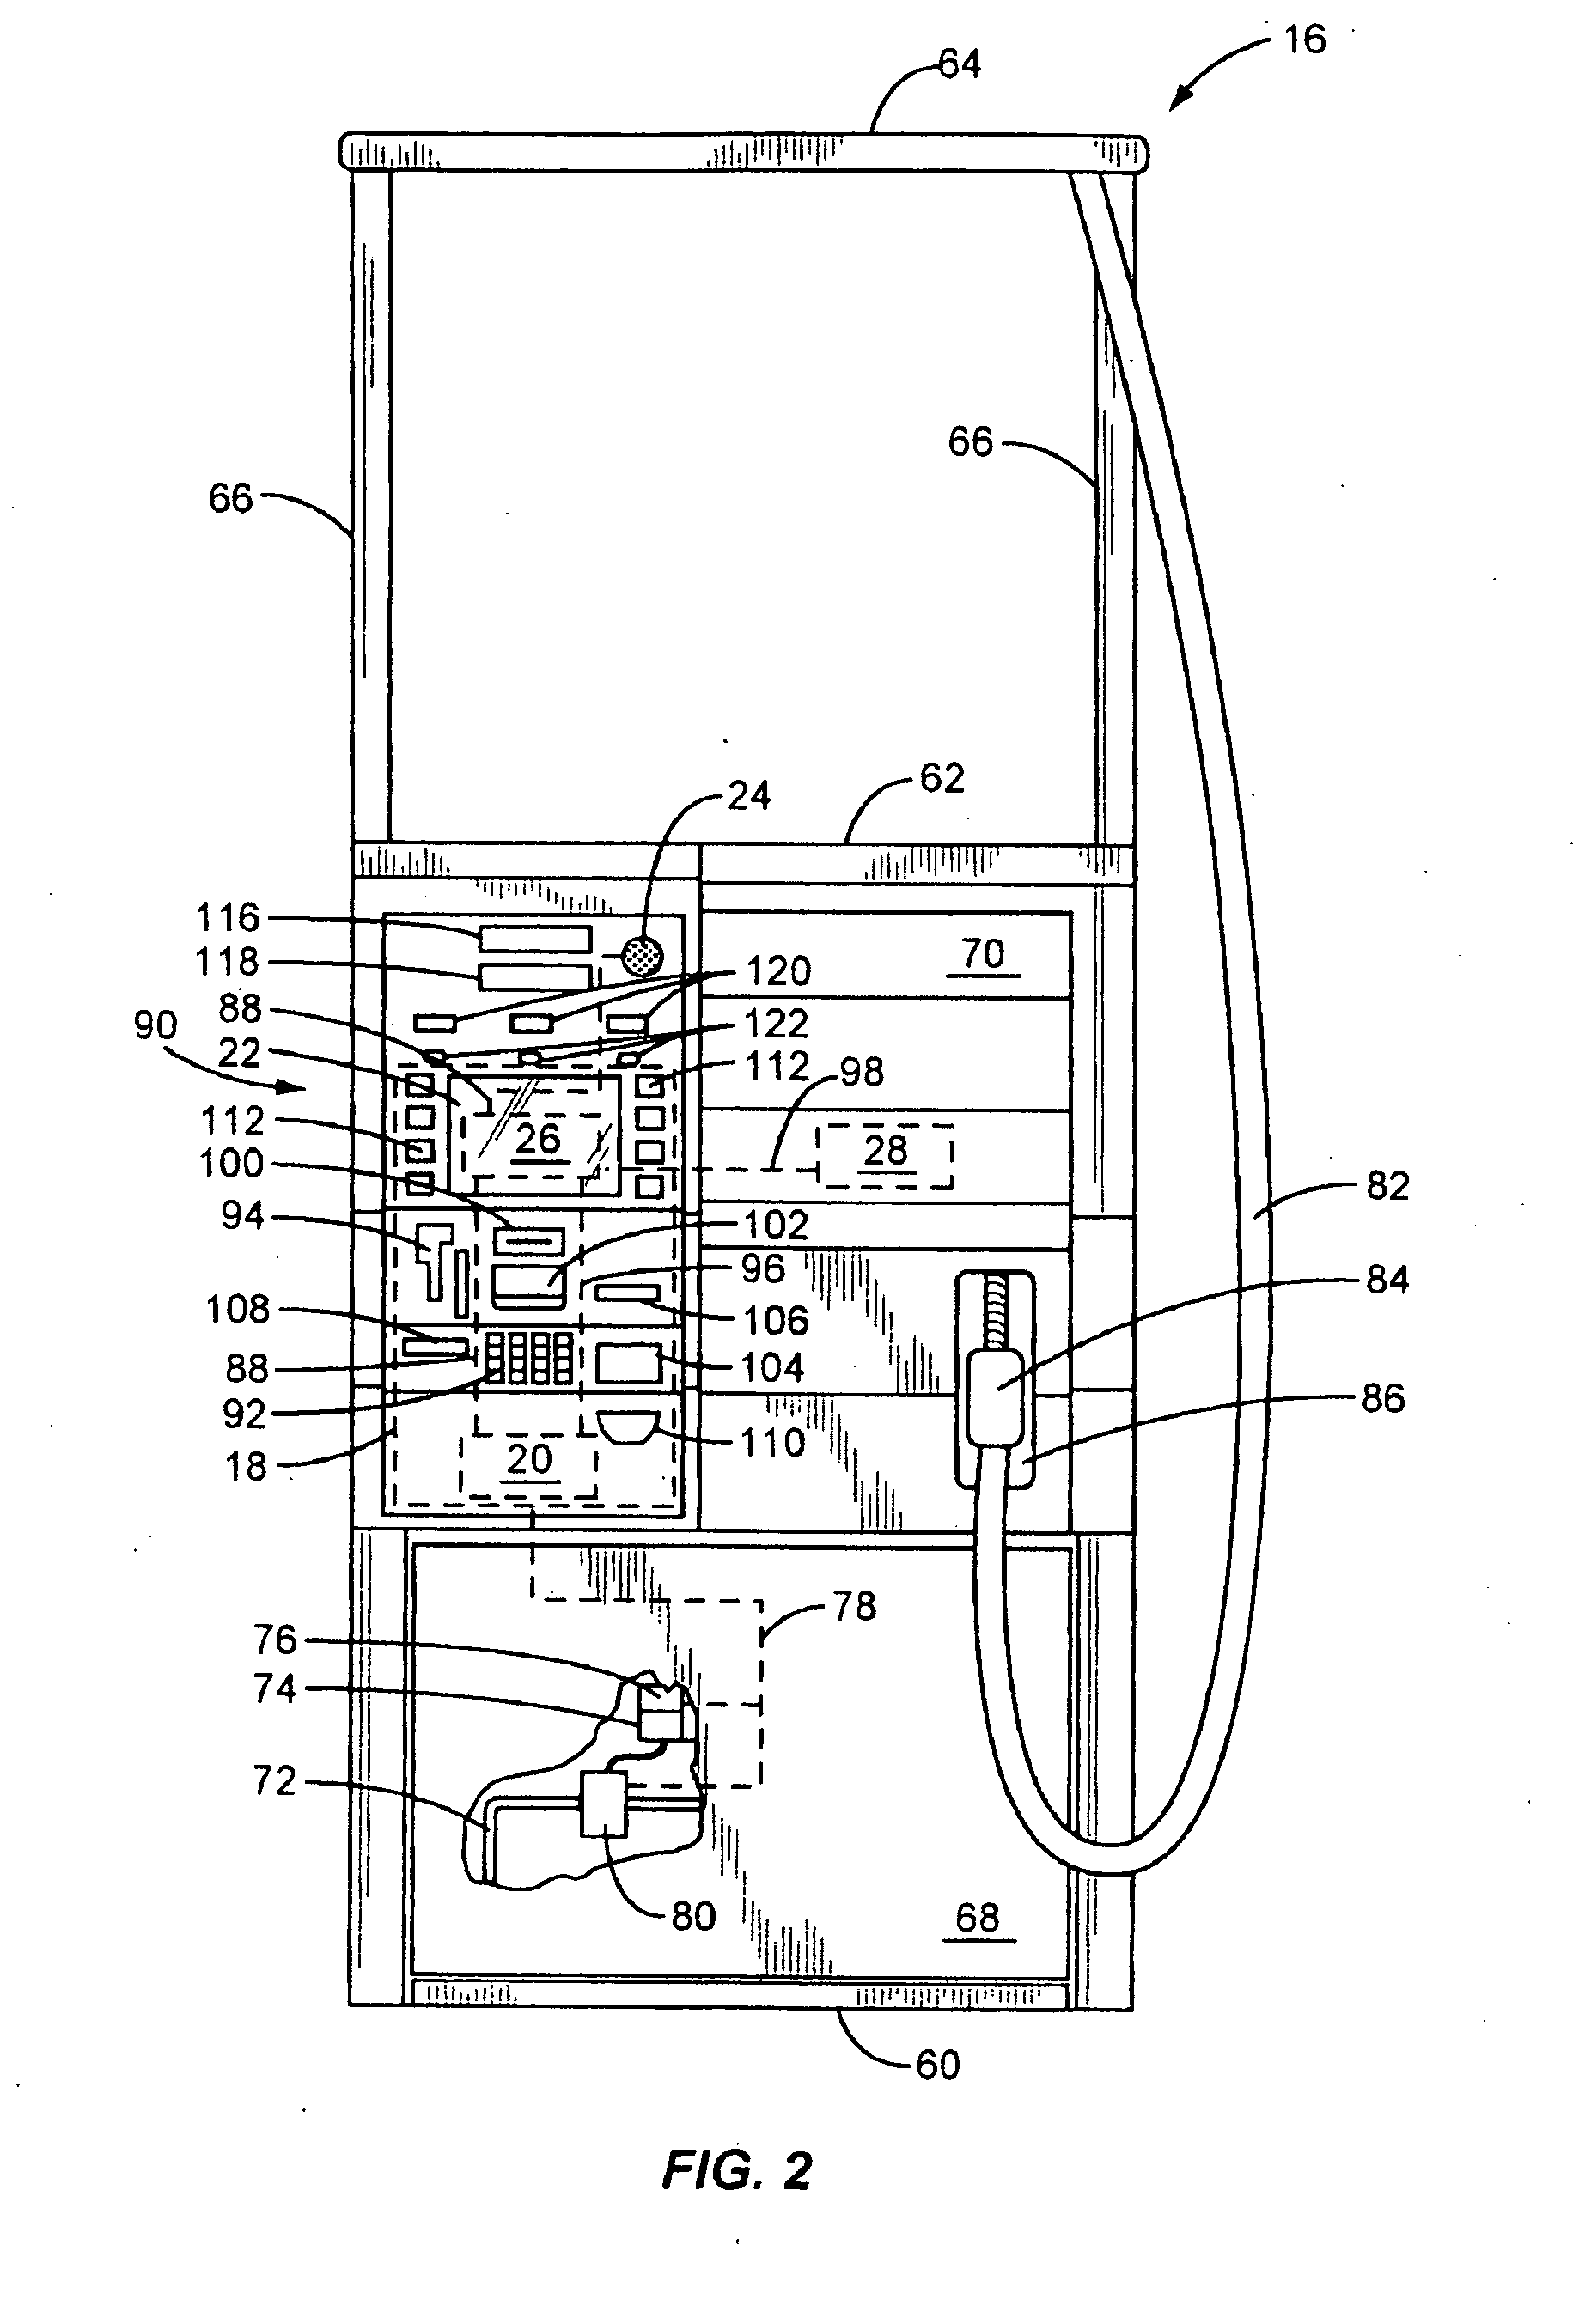 System and method for controlling secure content and non-secure content at a fuel dispenser or other retail device